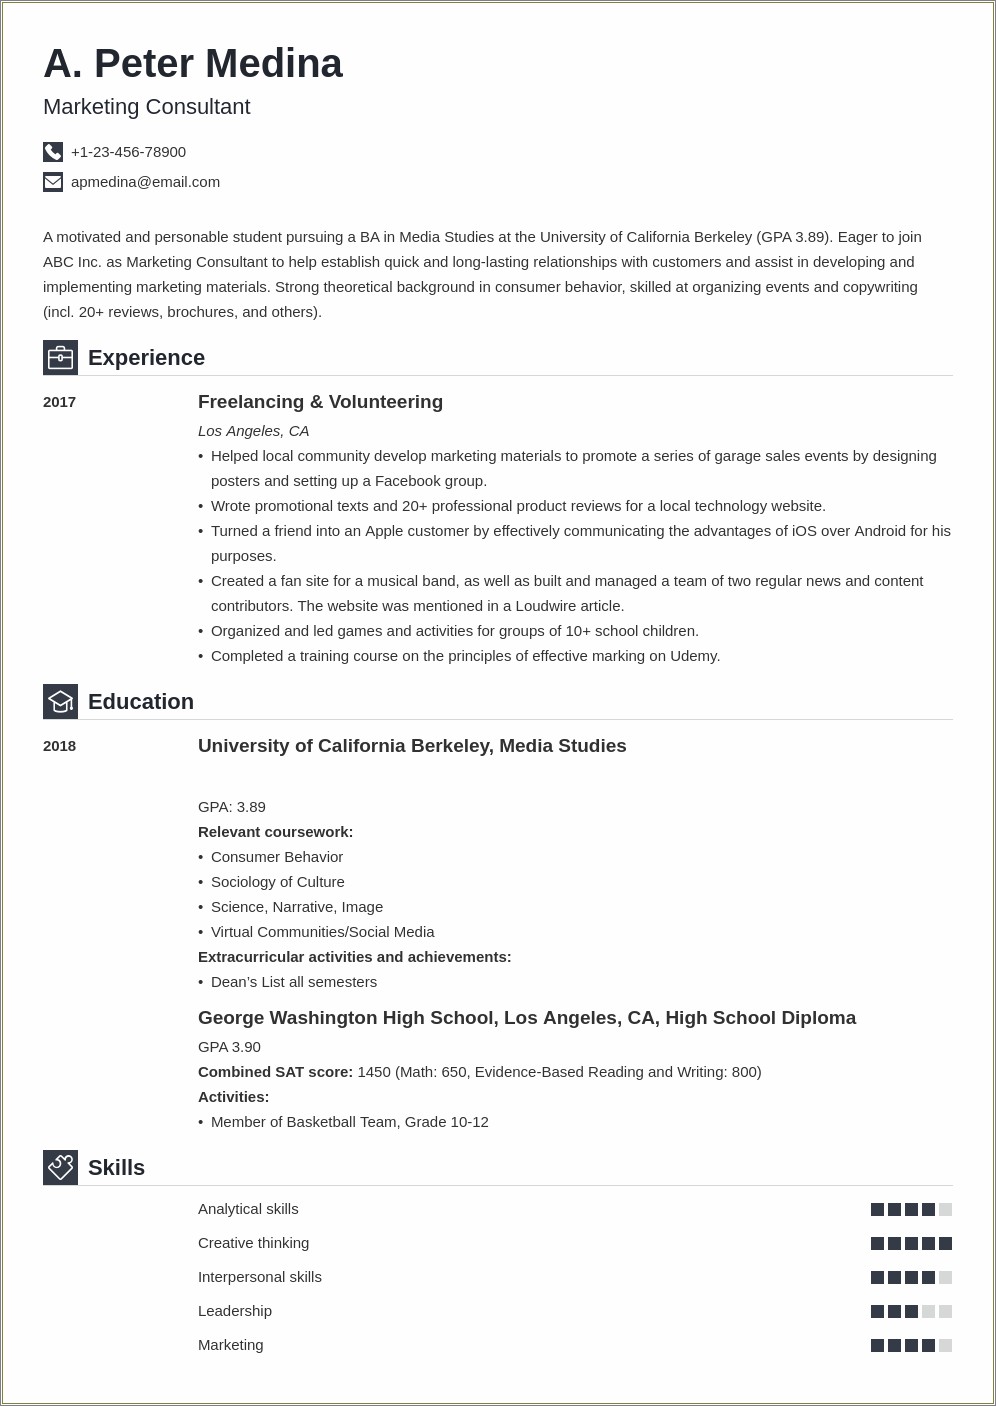 Sample Job Resume Without Work Experience